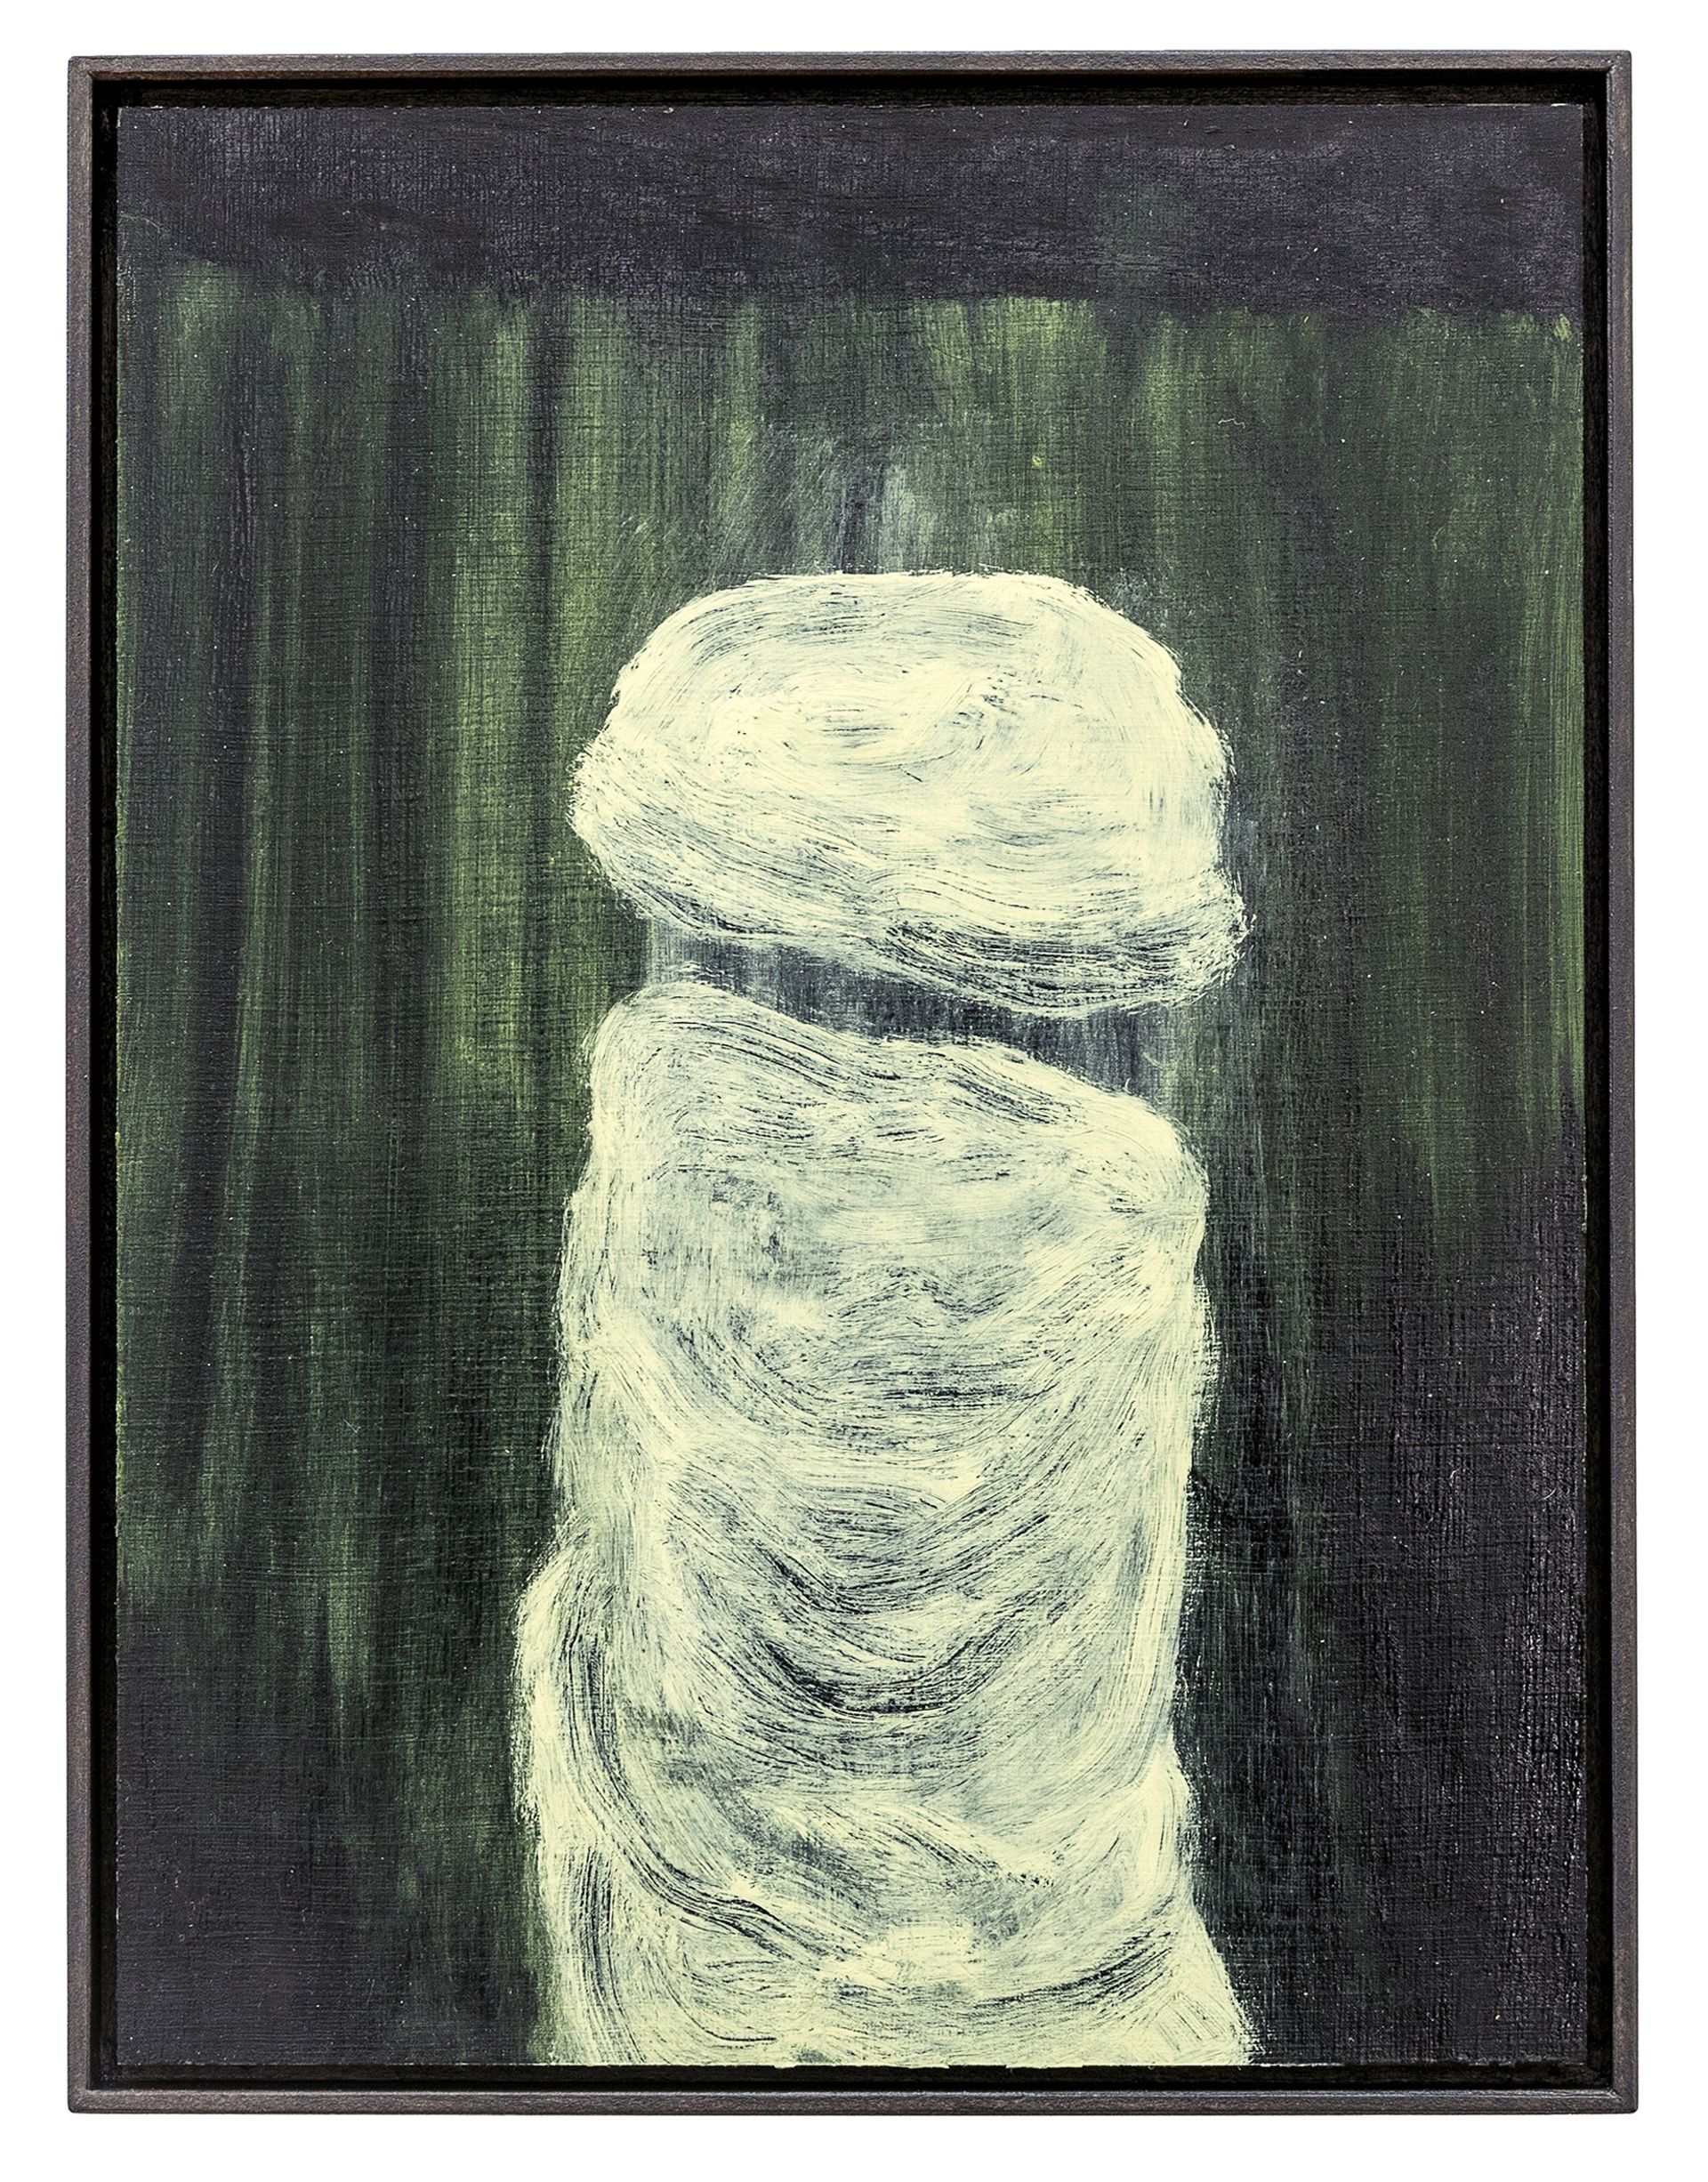 Untitled, 2016, oil on paper on MDF in artists frame, 39.8 × 29.8 cm